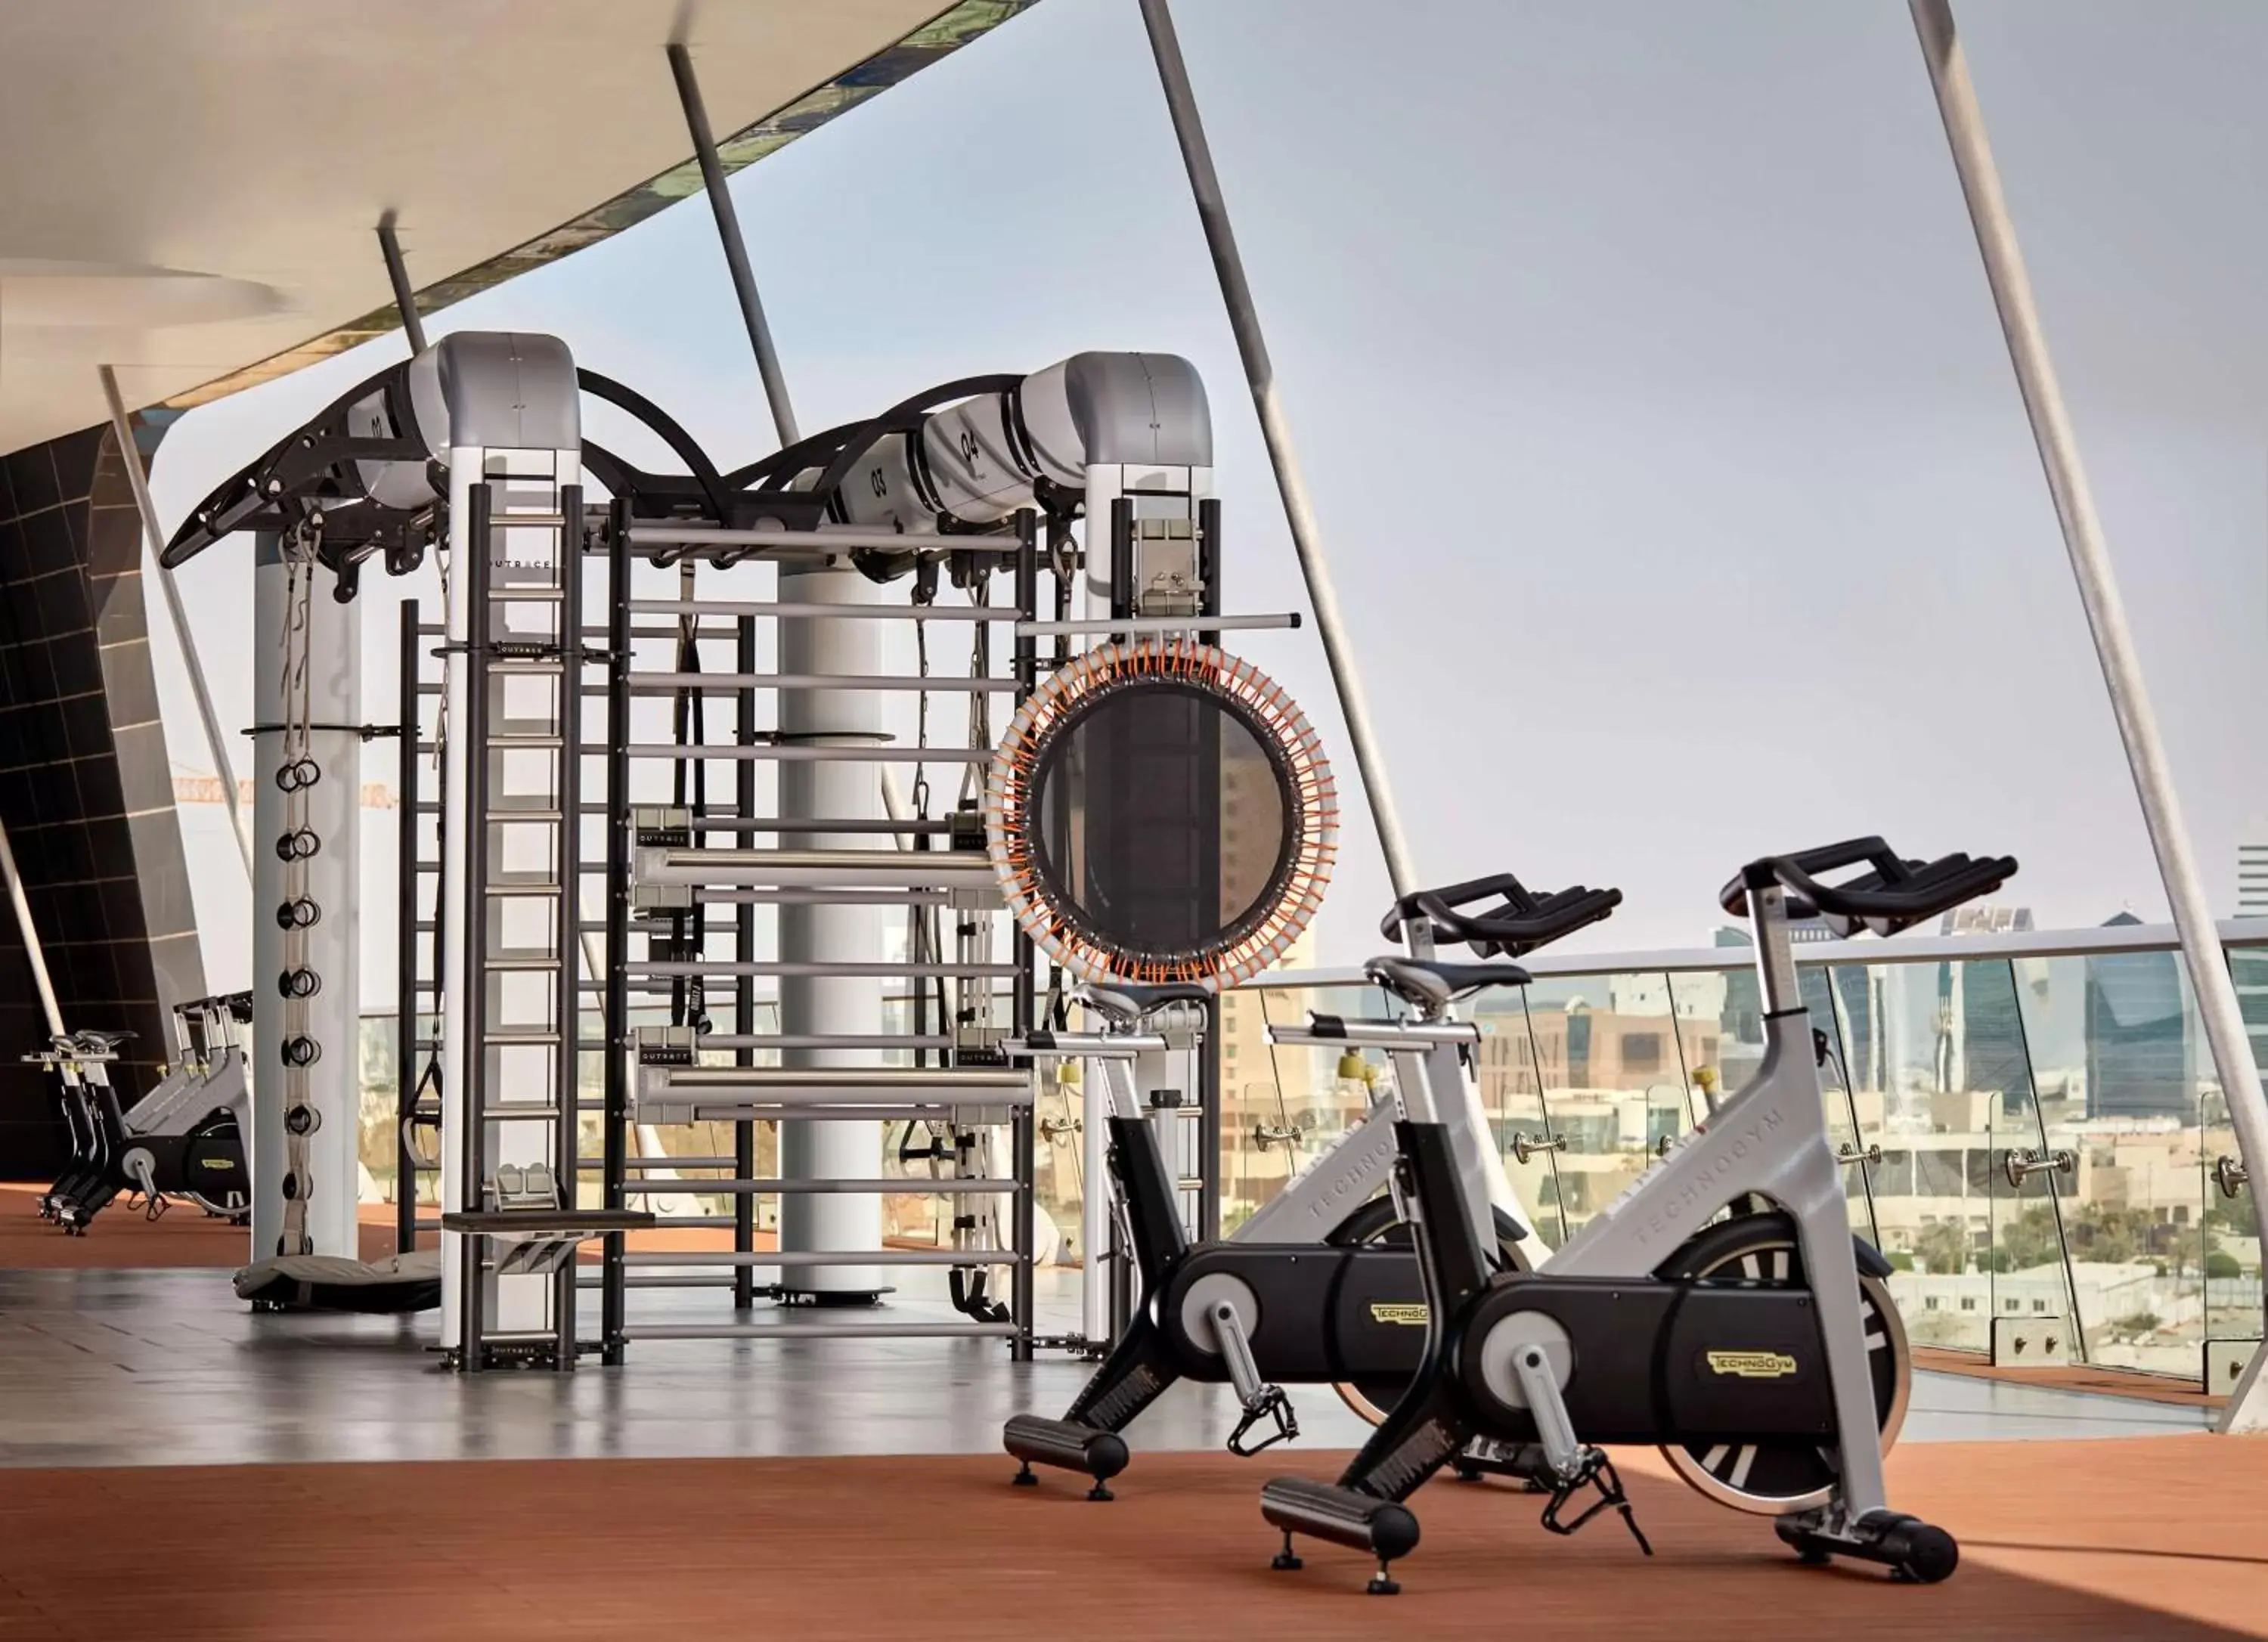 Fitness centre/facilities, Fitness Center/Facilities in Grand Hyatt Abu Dhabi Hotel & Residences Emirates Pearl